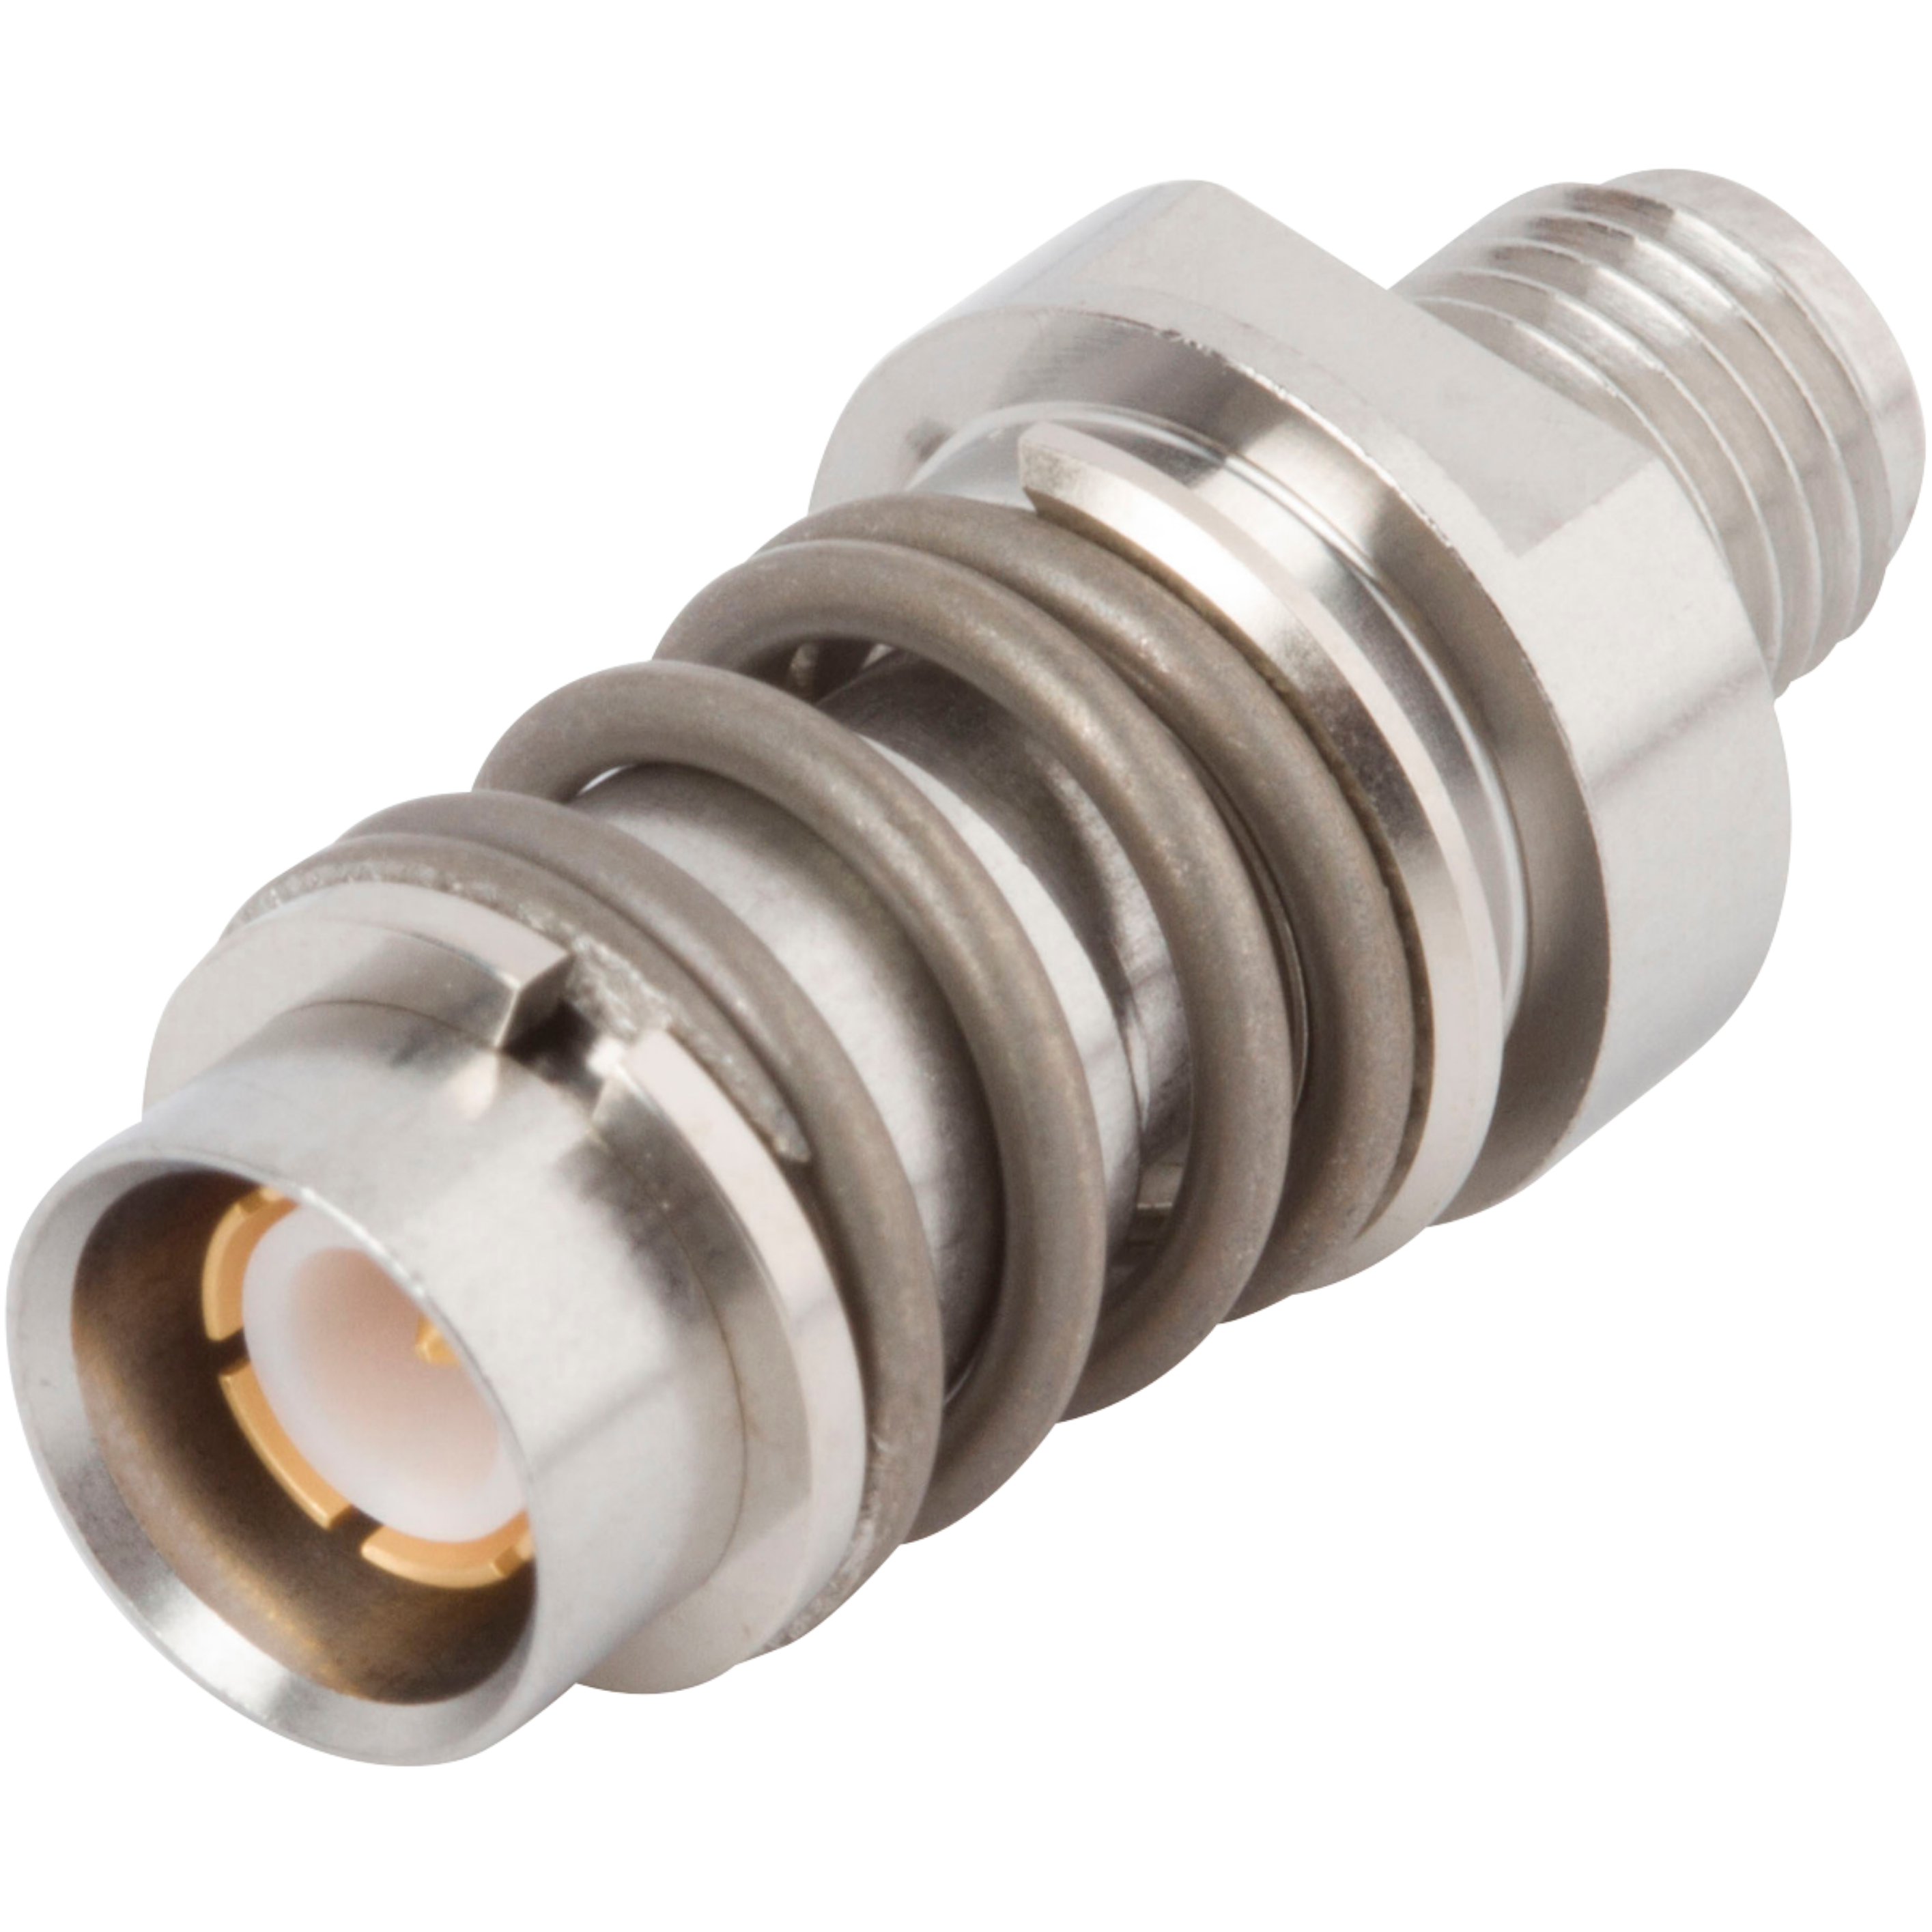 BZ Male  to SMA Female Adapter, Spring Loaded, SF1122-6101